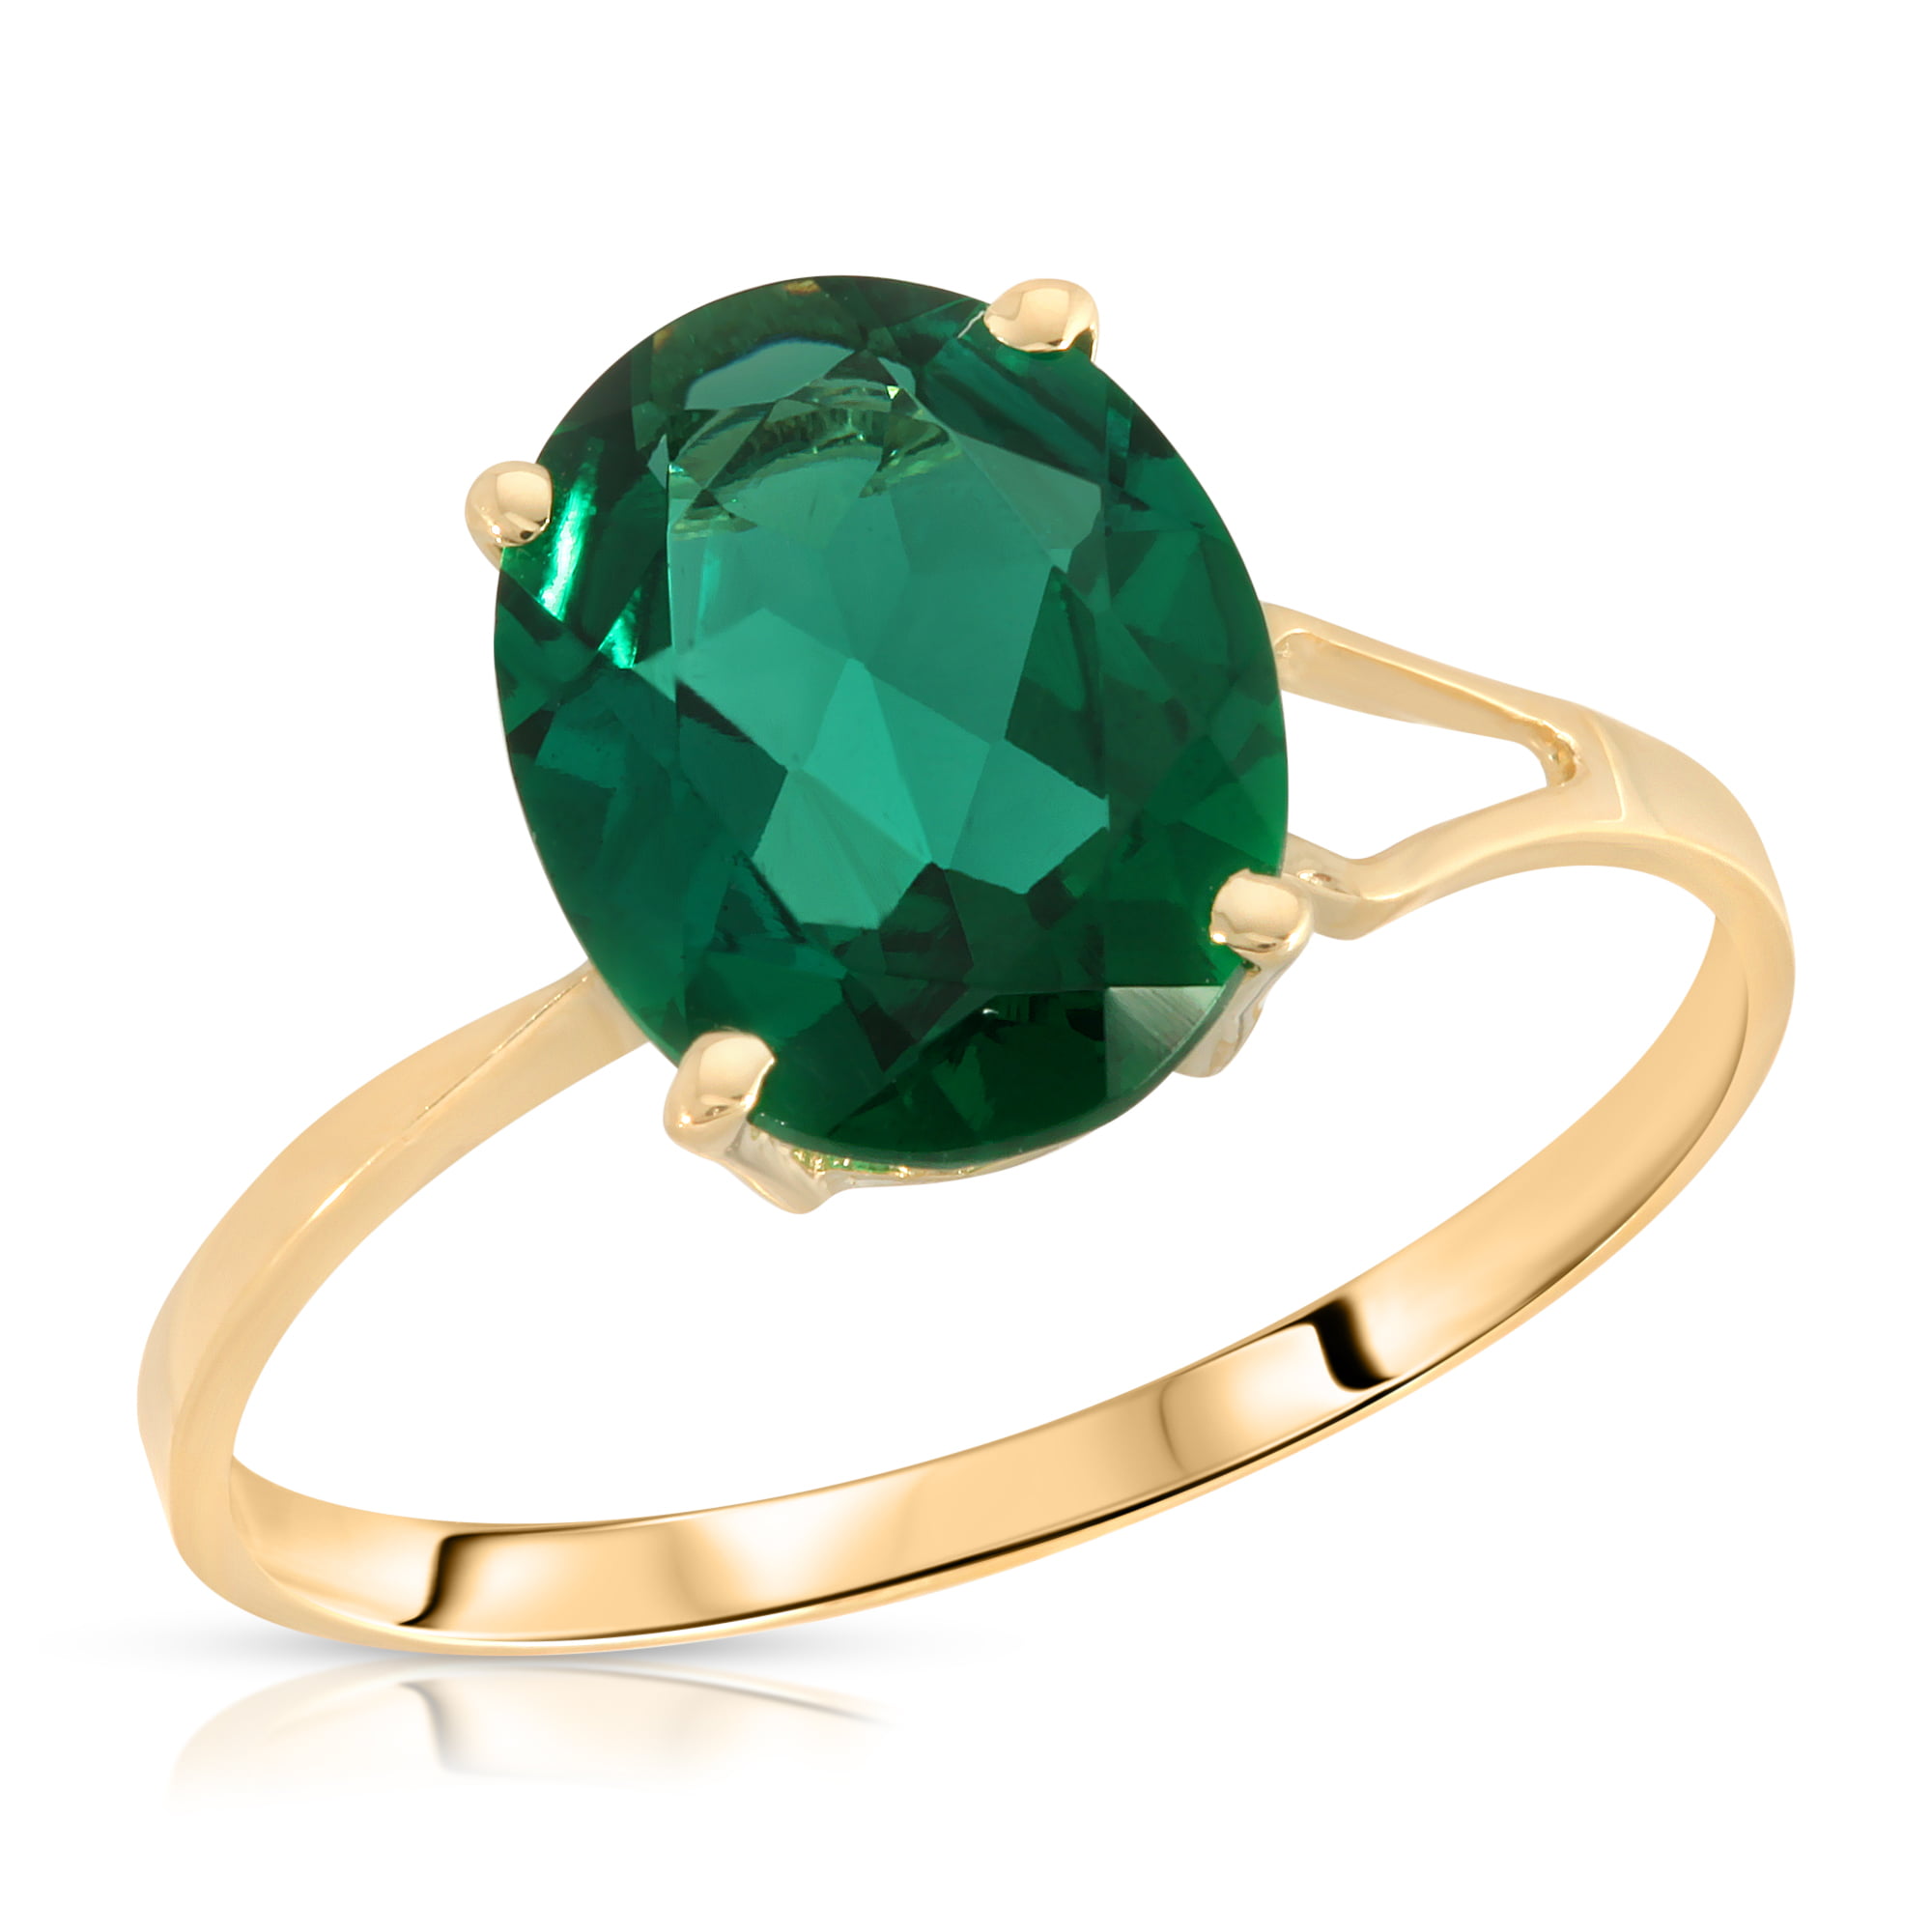 5 Carat Colombian Emerald Ring - 156 For Sale on 1stDibs | 5 carat emerald  ring, 5 carat colombian emerald price, 5 carat emerald price